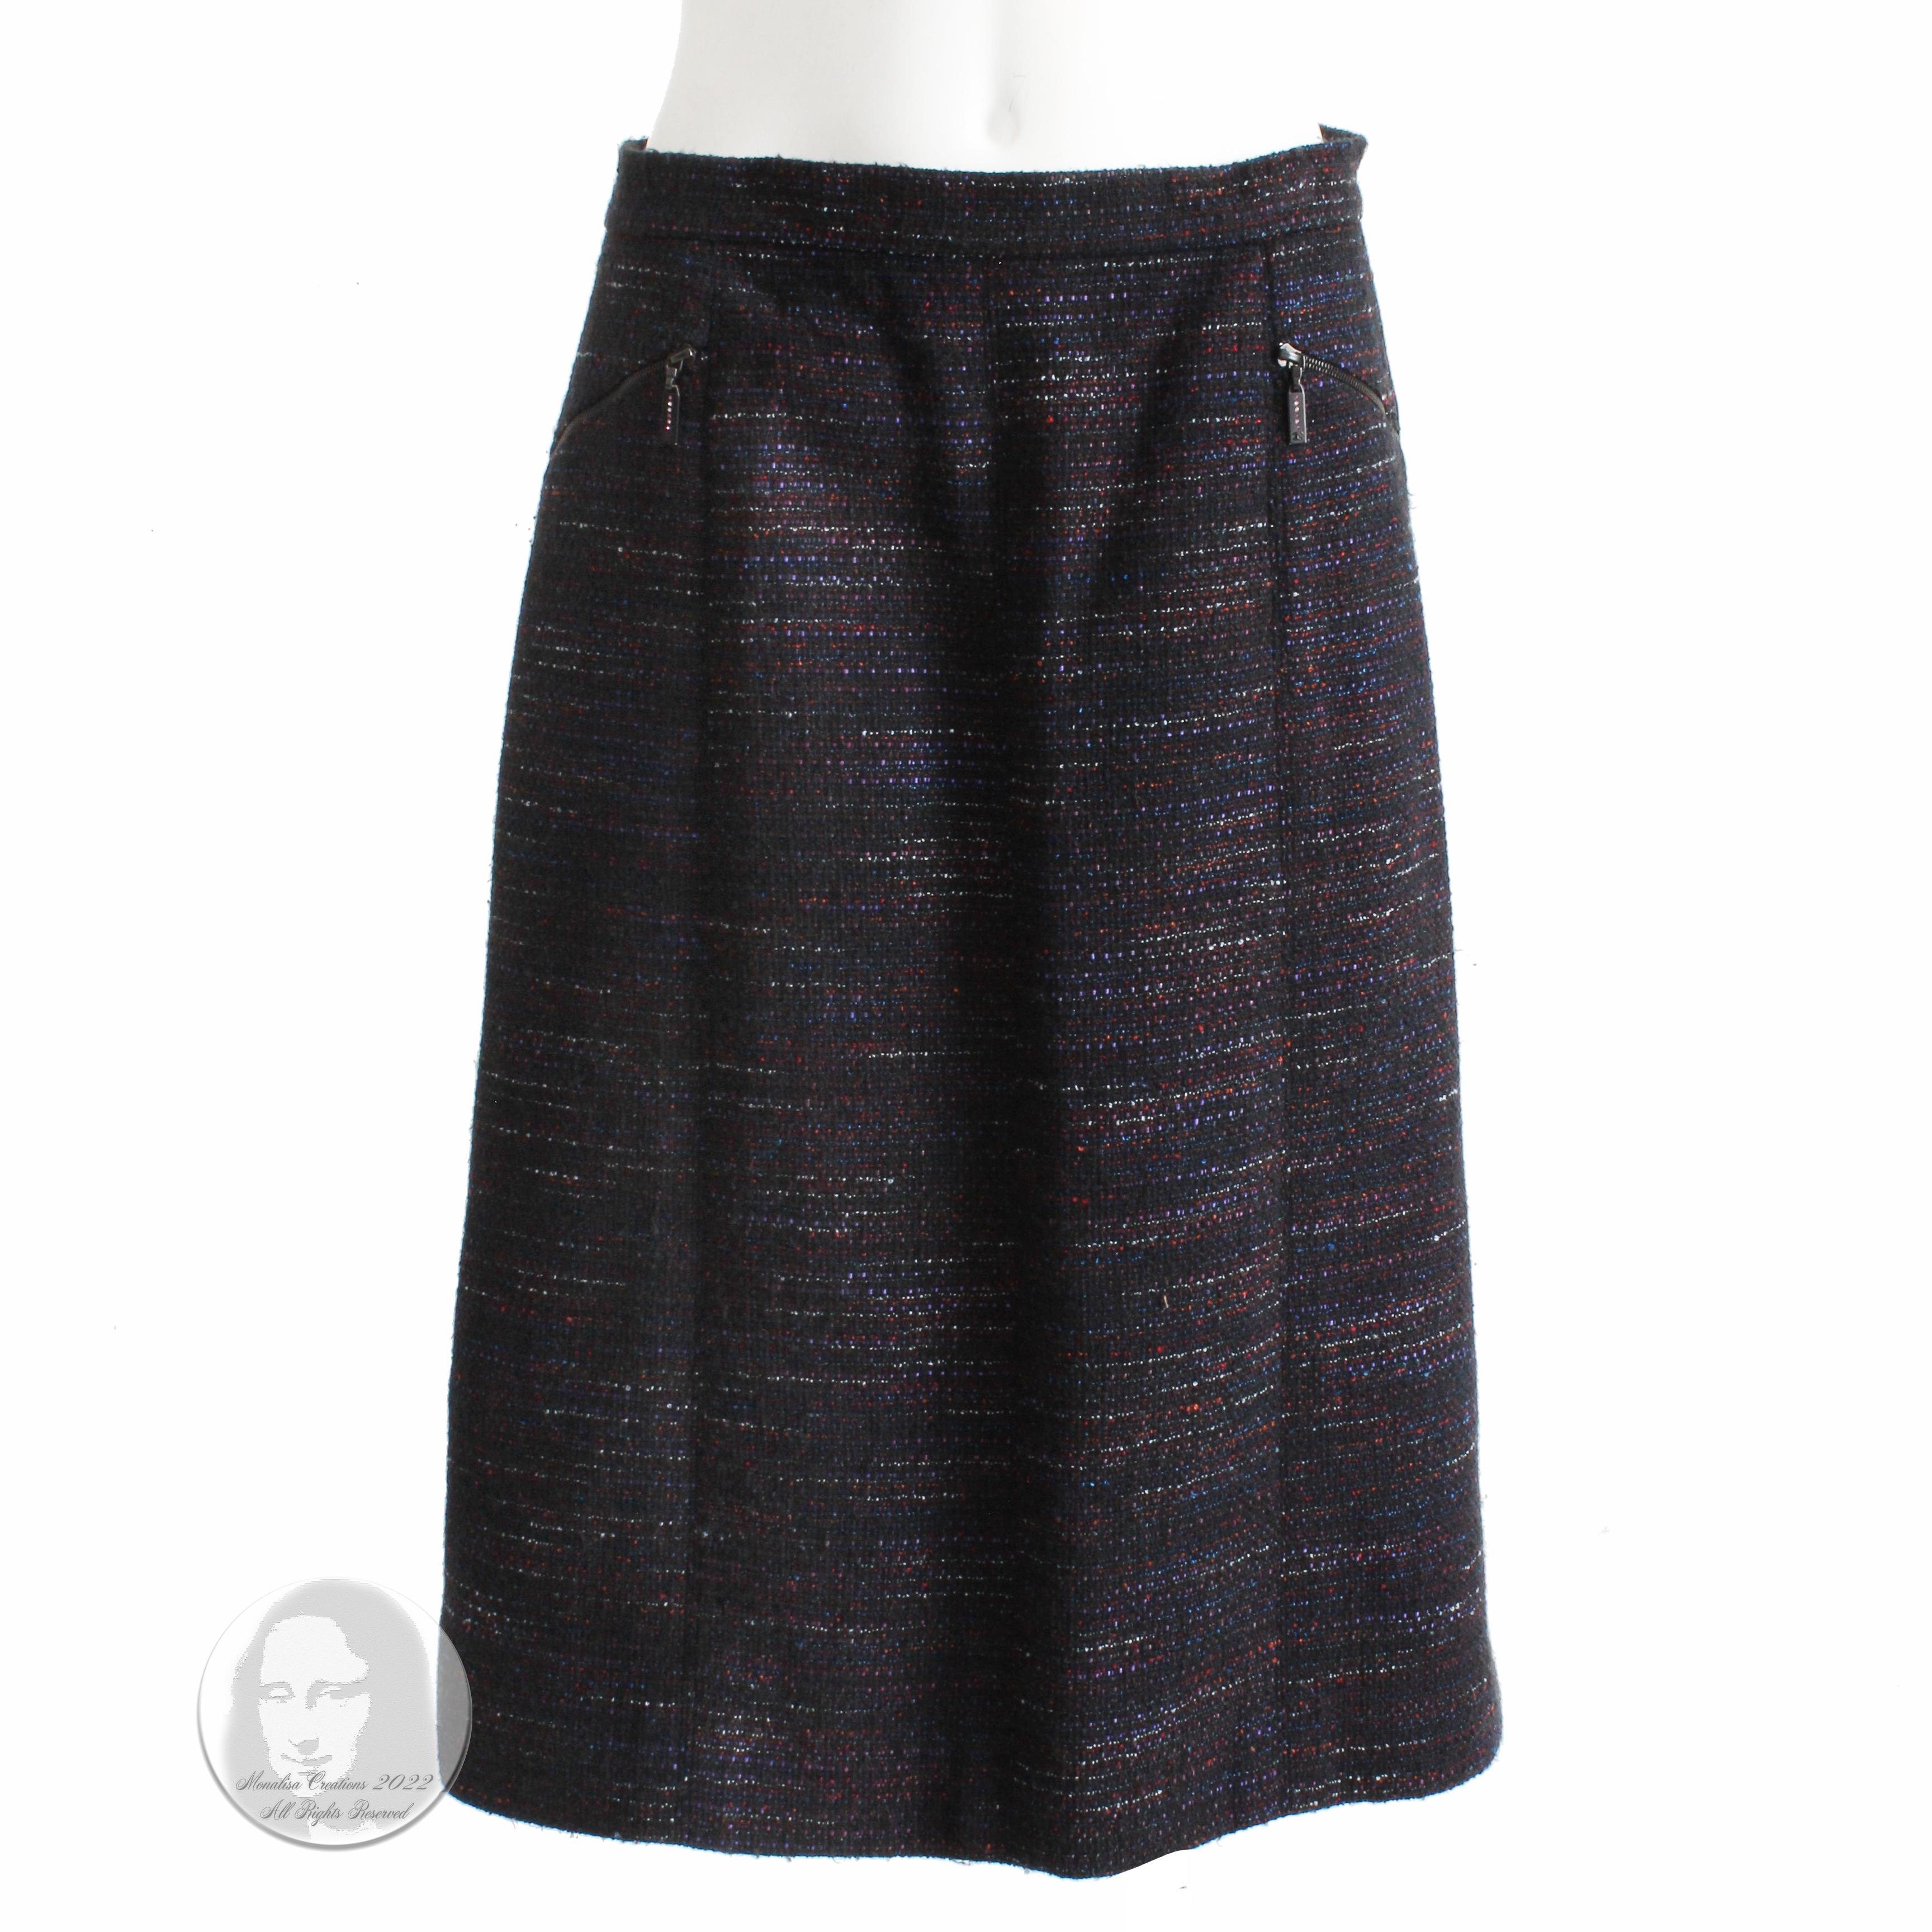 Black Chanel Skirt Multicolor Cotton Blend Tweed Pencil Style 02A Collection Size 40